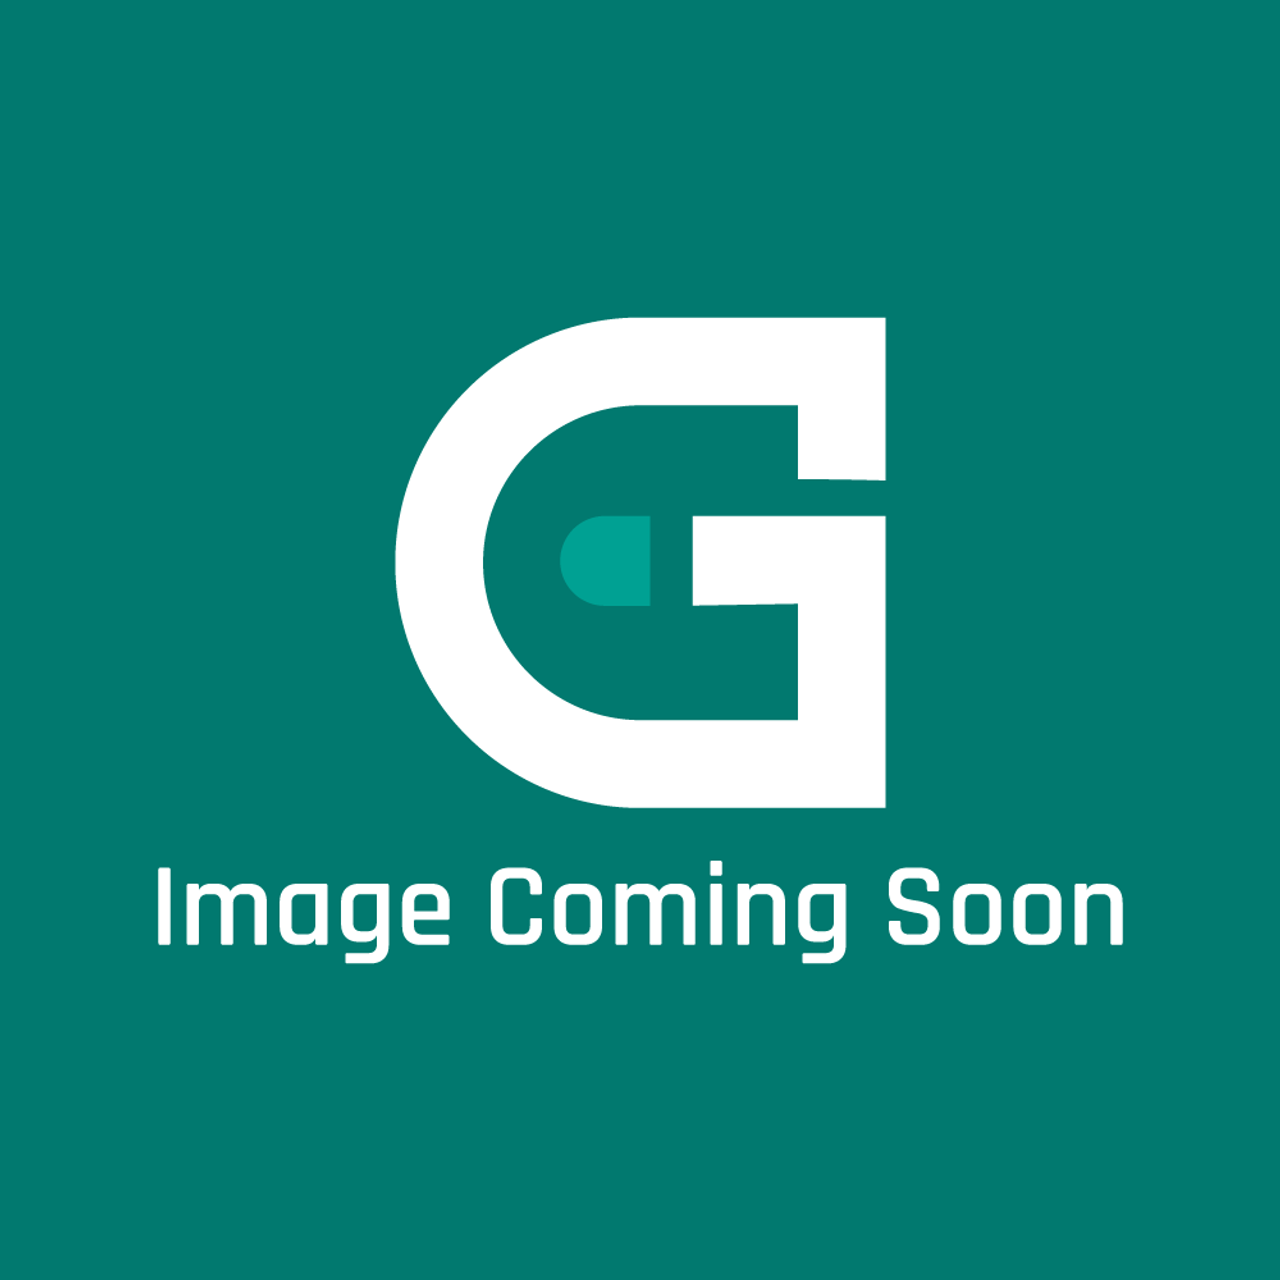 AGA Marvel A3796 - Inst.Fitting 05/97 Junkers-Sit - Image Coming Soon!